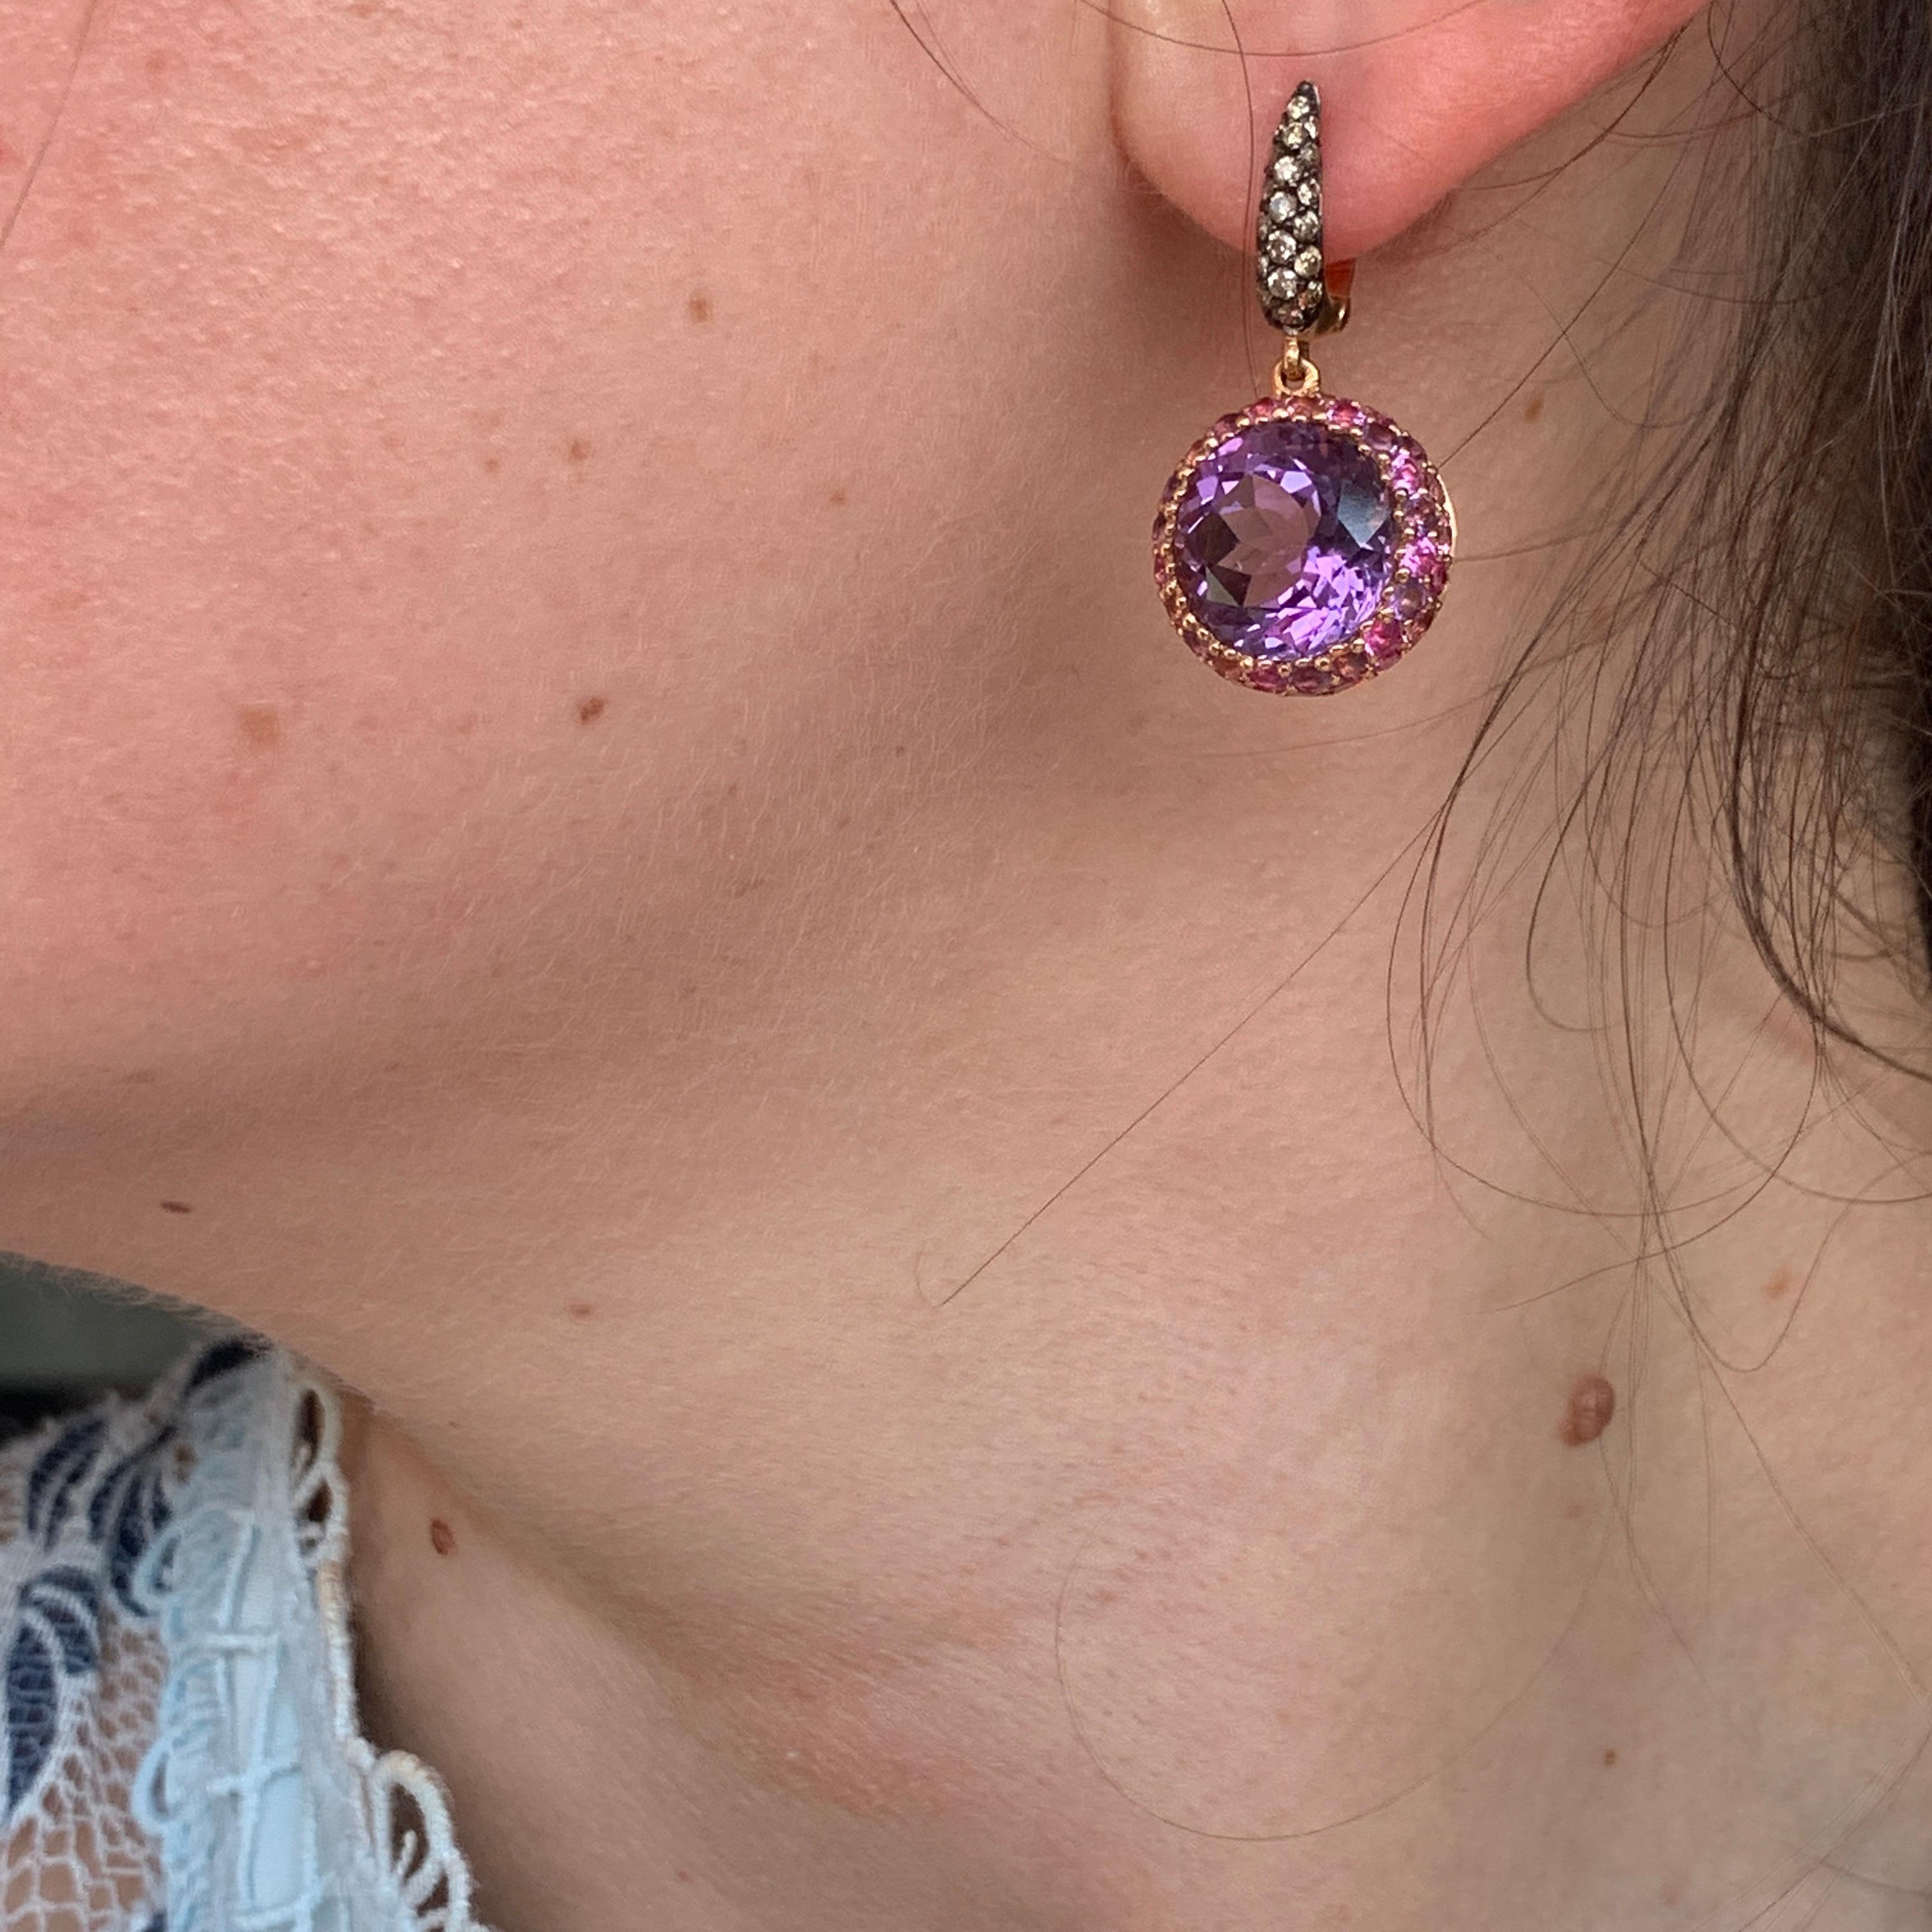 Earrings Yellow Gold 18 K (Matching Ring Available)

Diamond 38RND -0,41ct
Amethyst 26-9,79ct
Pink Sapphire 30-1,23ct
Tourmaline 24-0,67ct

Weight 8.31 grams

With a heritage of ancient fine Swiss jewelry traditions, NATKINA is a Geneva based